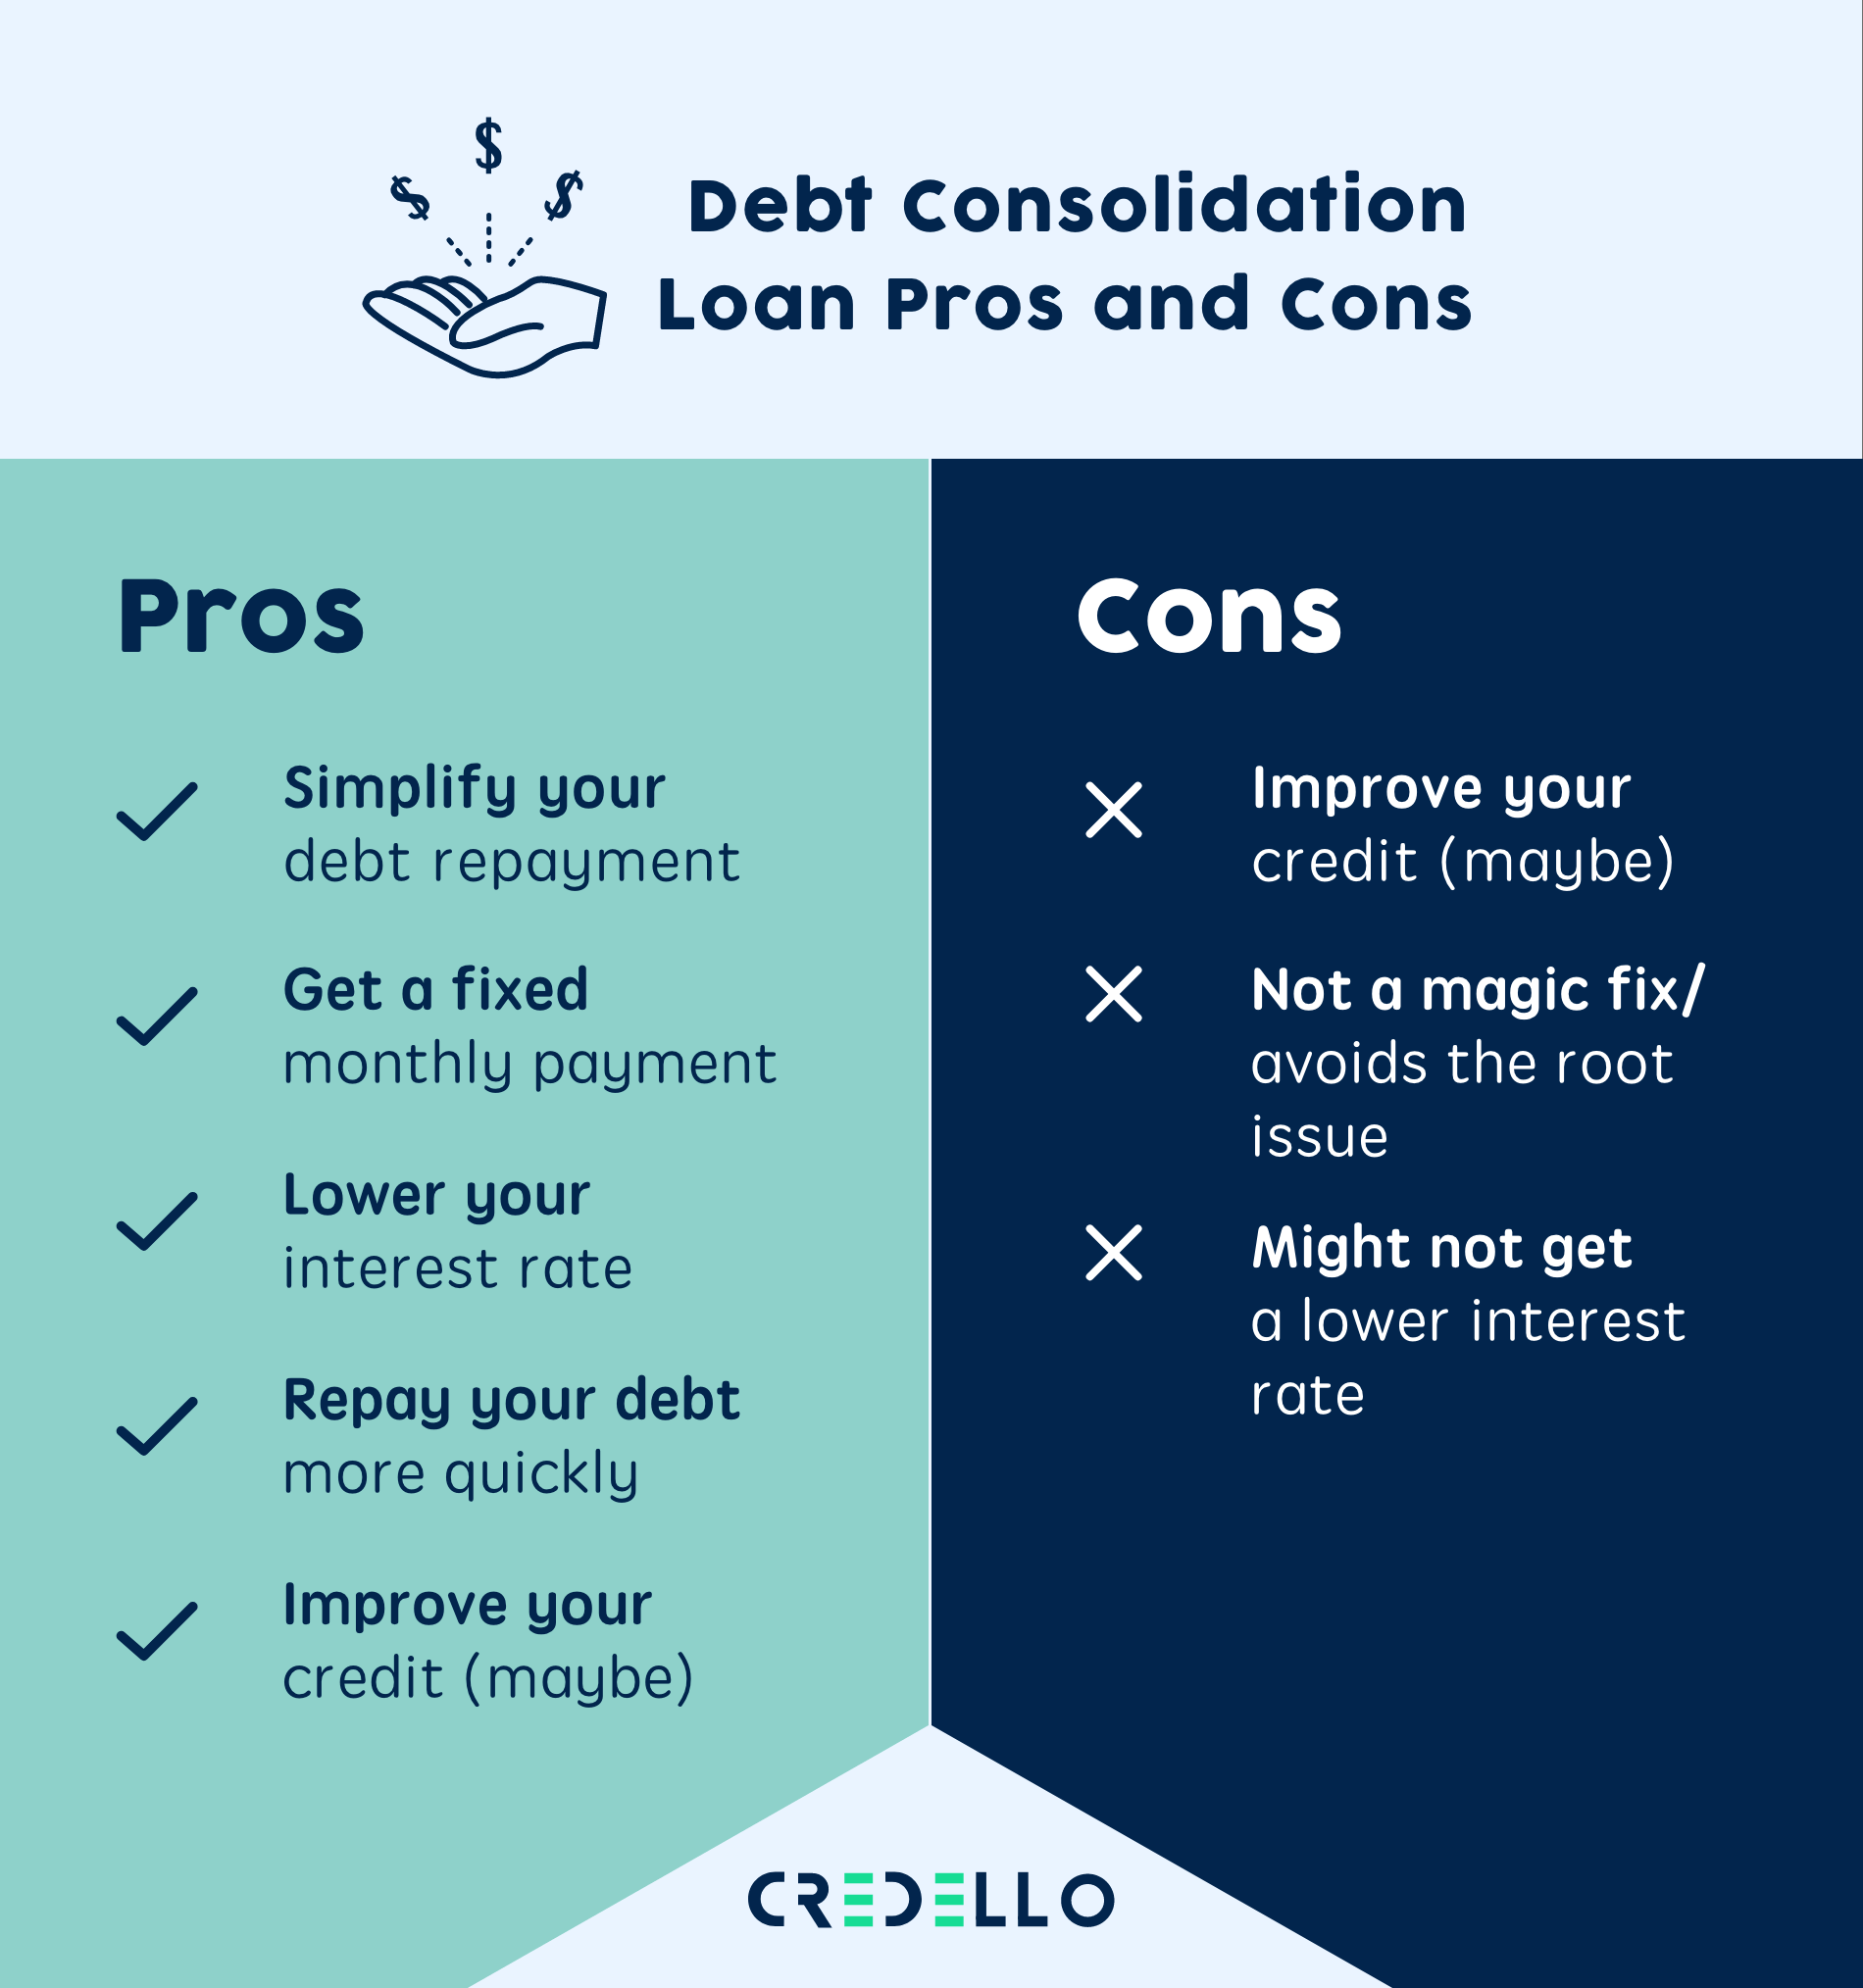 Pros and cons of debt consolidation